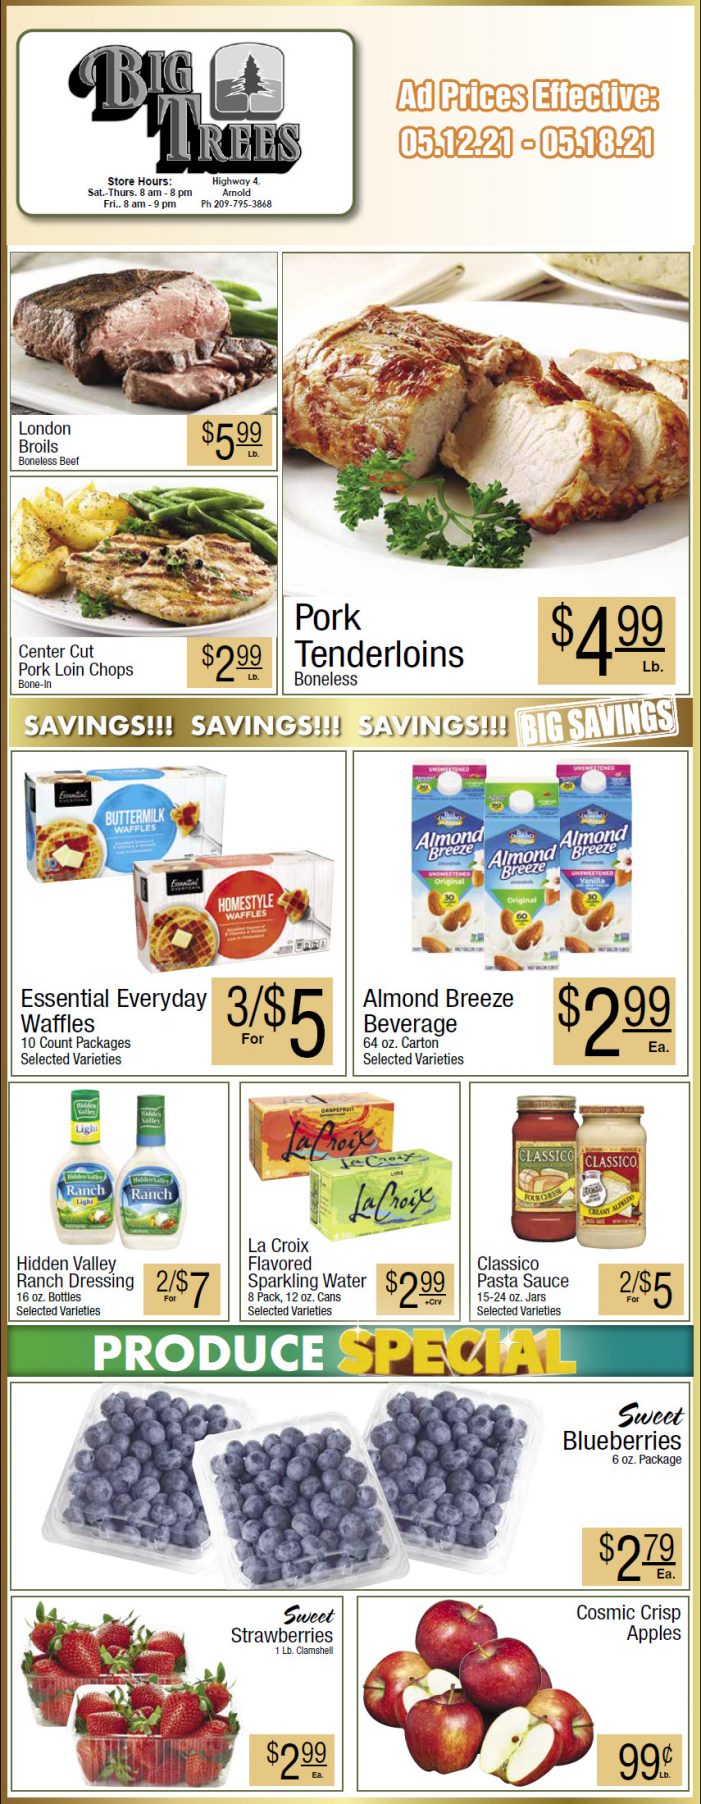 Big Trees Market Weekly Ad & Grocery Specials Through May 18th!  Shop Local & Save!!